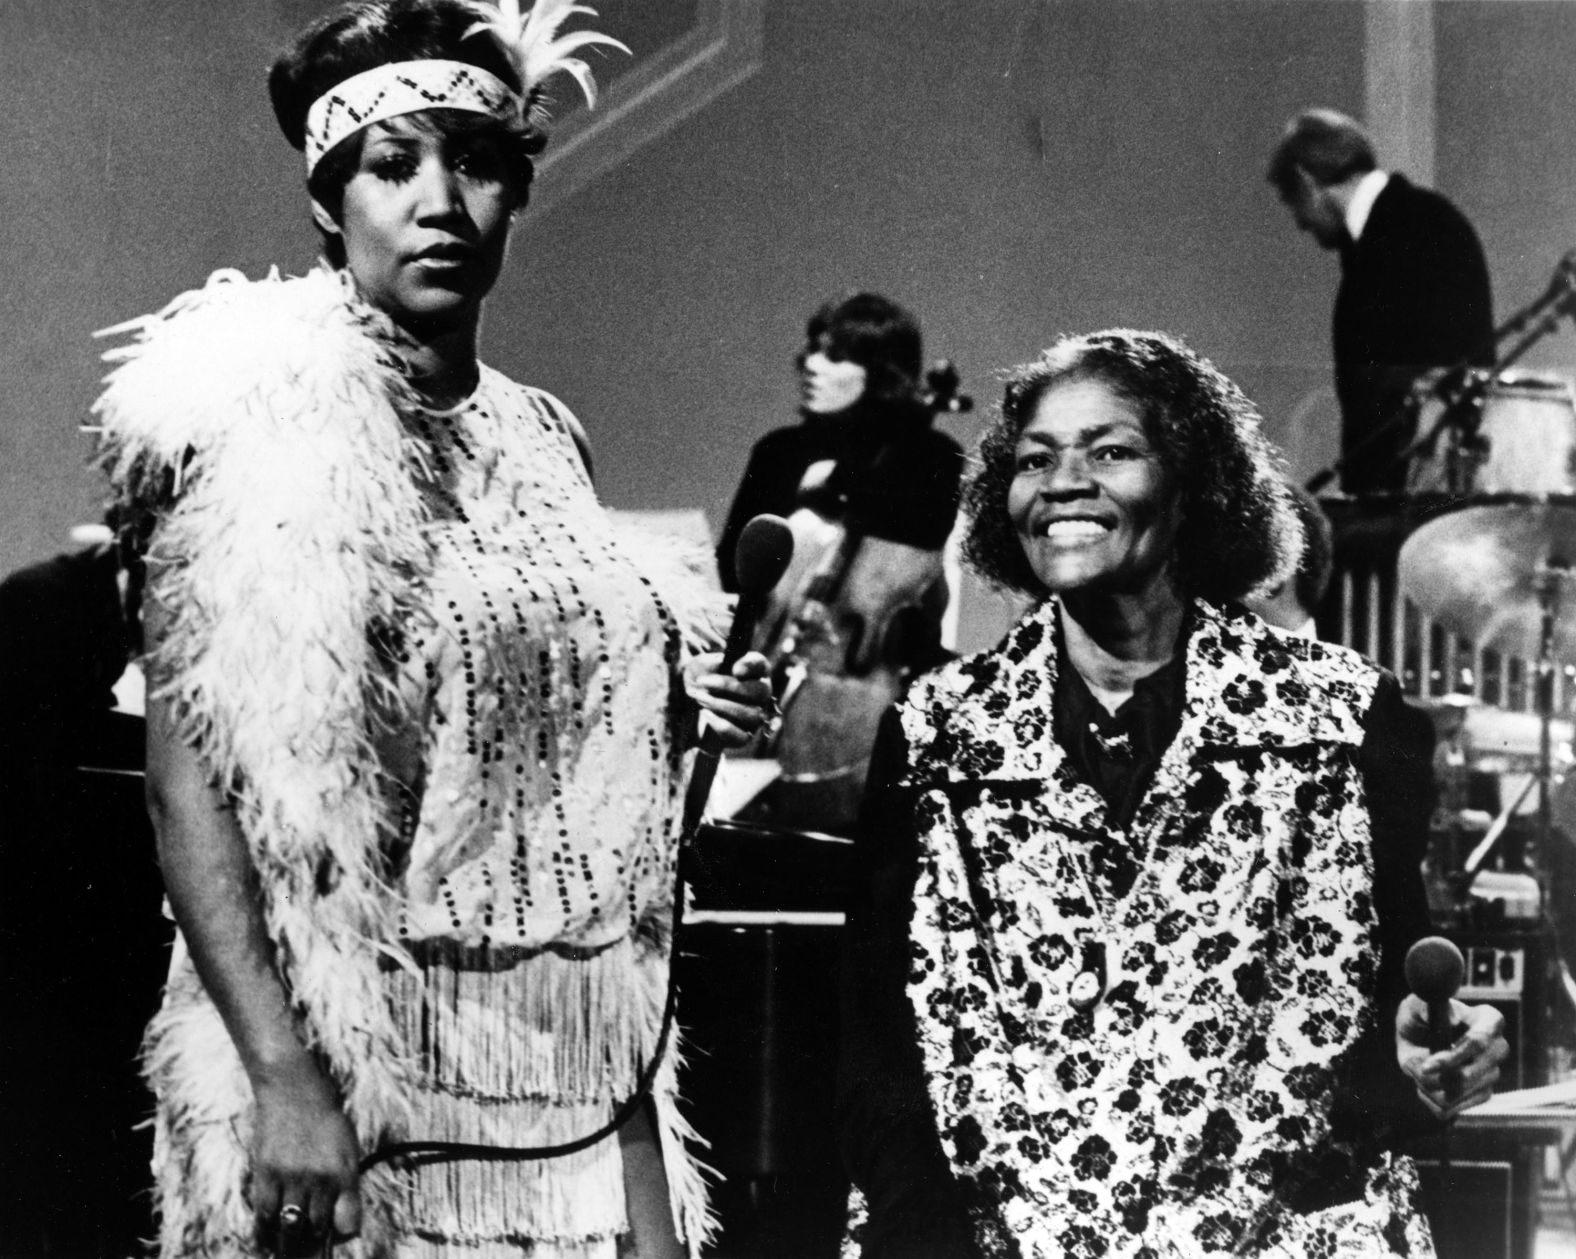 Franklin and Big Mama Thornton perform together onstage on the television series, 'Omnibus,' in 1980.